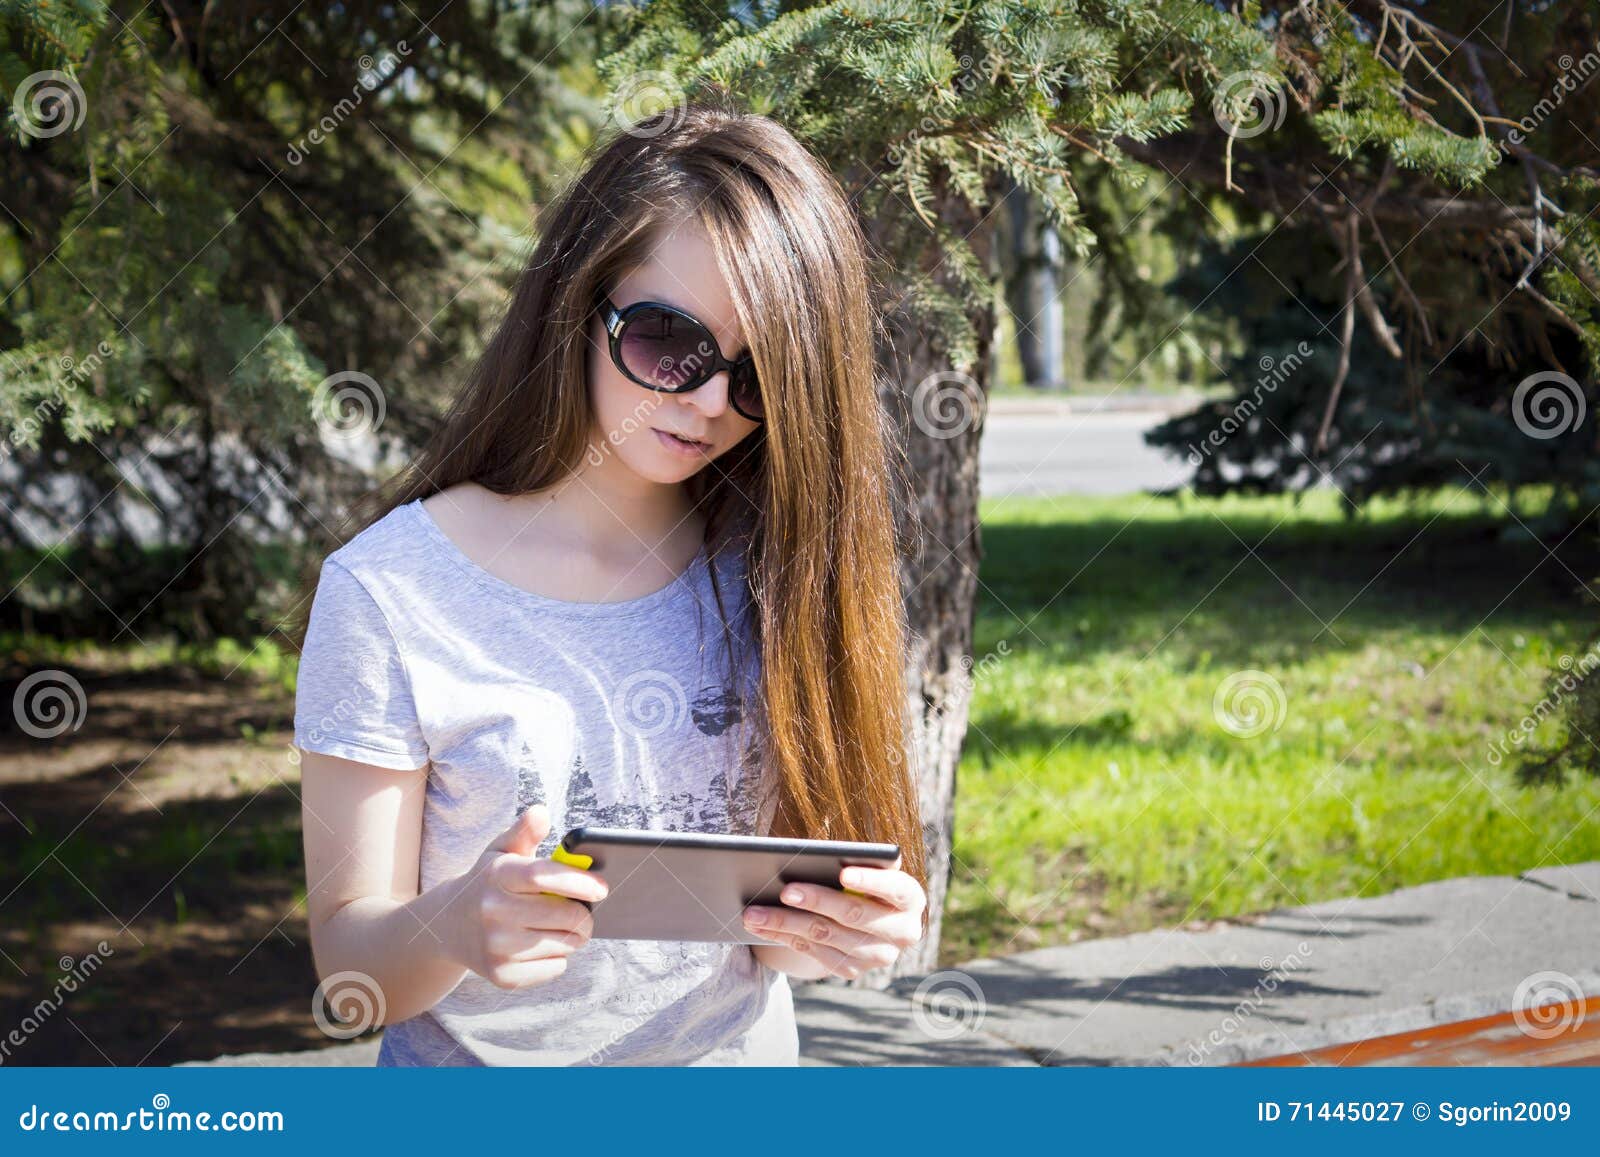 Long Haired Girl Enjoys The Tablet Stock Image Image Of Hair Online 71445027